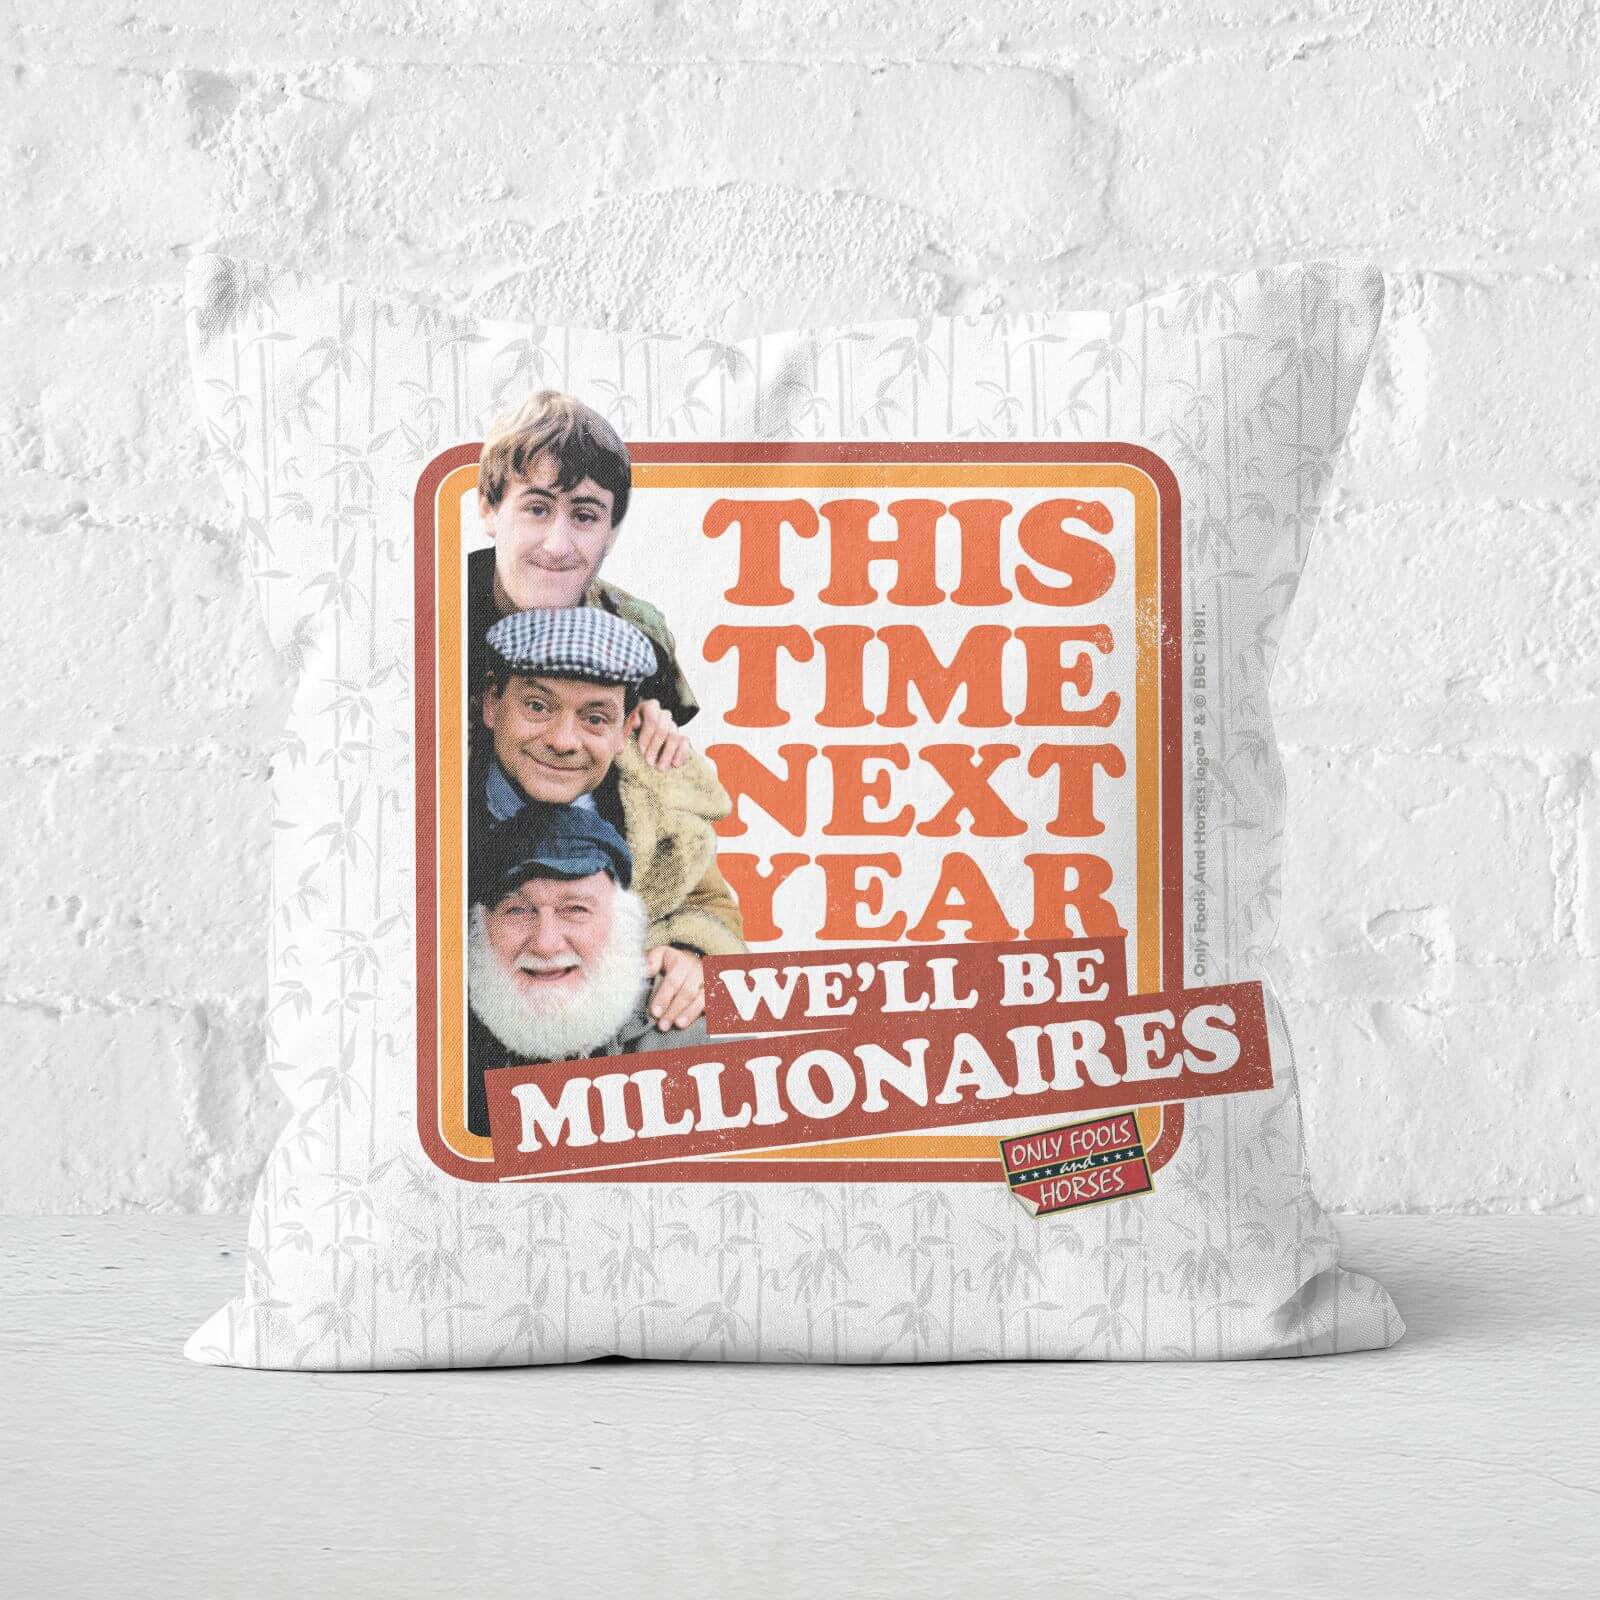 Only Fools And Horses This Time Next Year We'll Be Millionaires Square Cushion - 60x60cm - Soft Touch